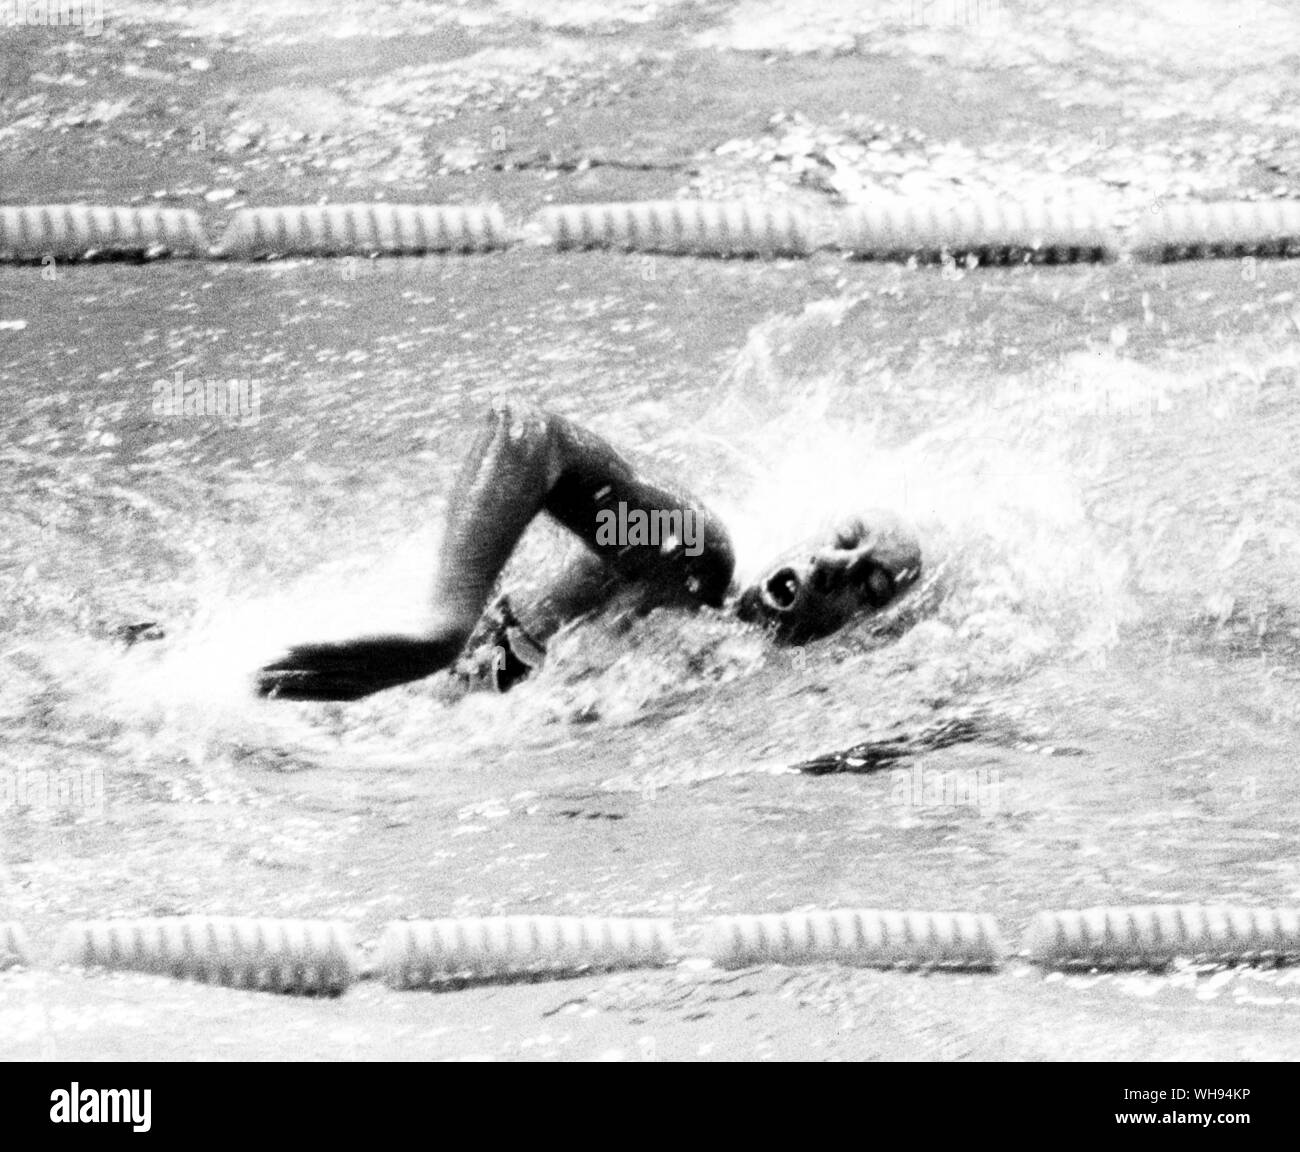 September 1972: Munich Olympics: Shane Gould (Australia) who won 3 gold medals, 1 silver and 1 bronze in Munich. Stock Photo